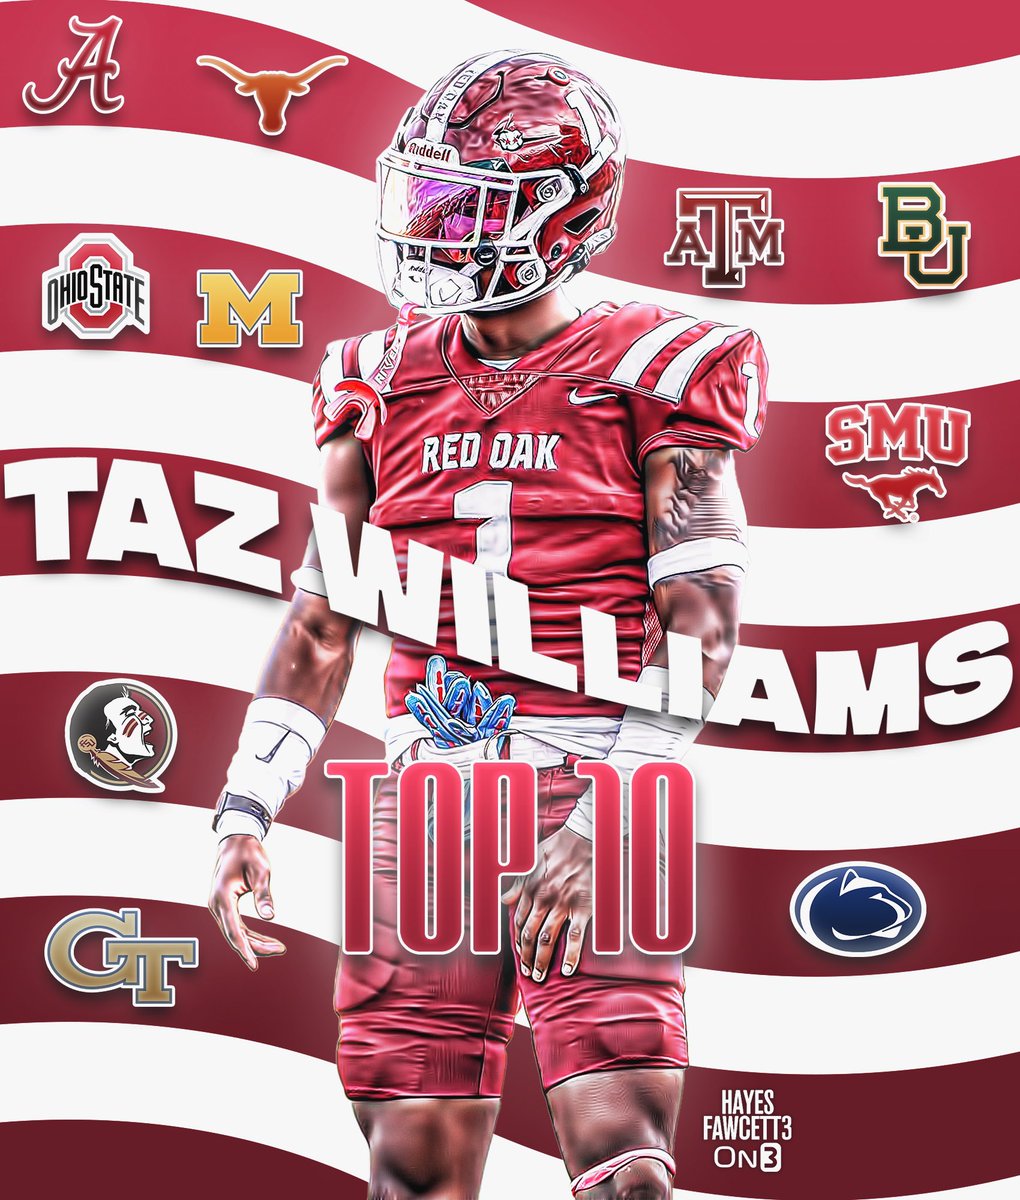 NEWS: Four-Star WR Taz Williams Jr. is down to 🔟 Schools! The 6’0 185 WR from Red Oak, TX is ranked as a Top 10 WR in Texas (per On3) Holds a total of 53 Offers Where Should He Go?👇🏽 on3.com/db/taz-william…